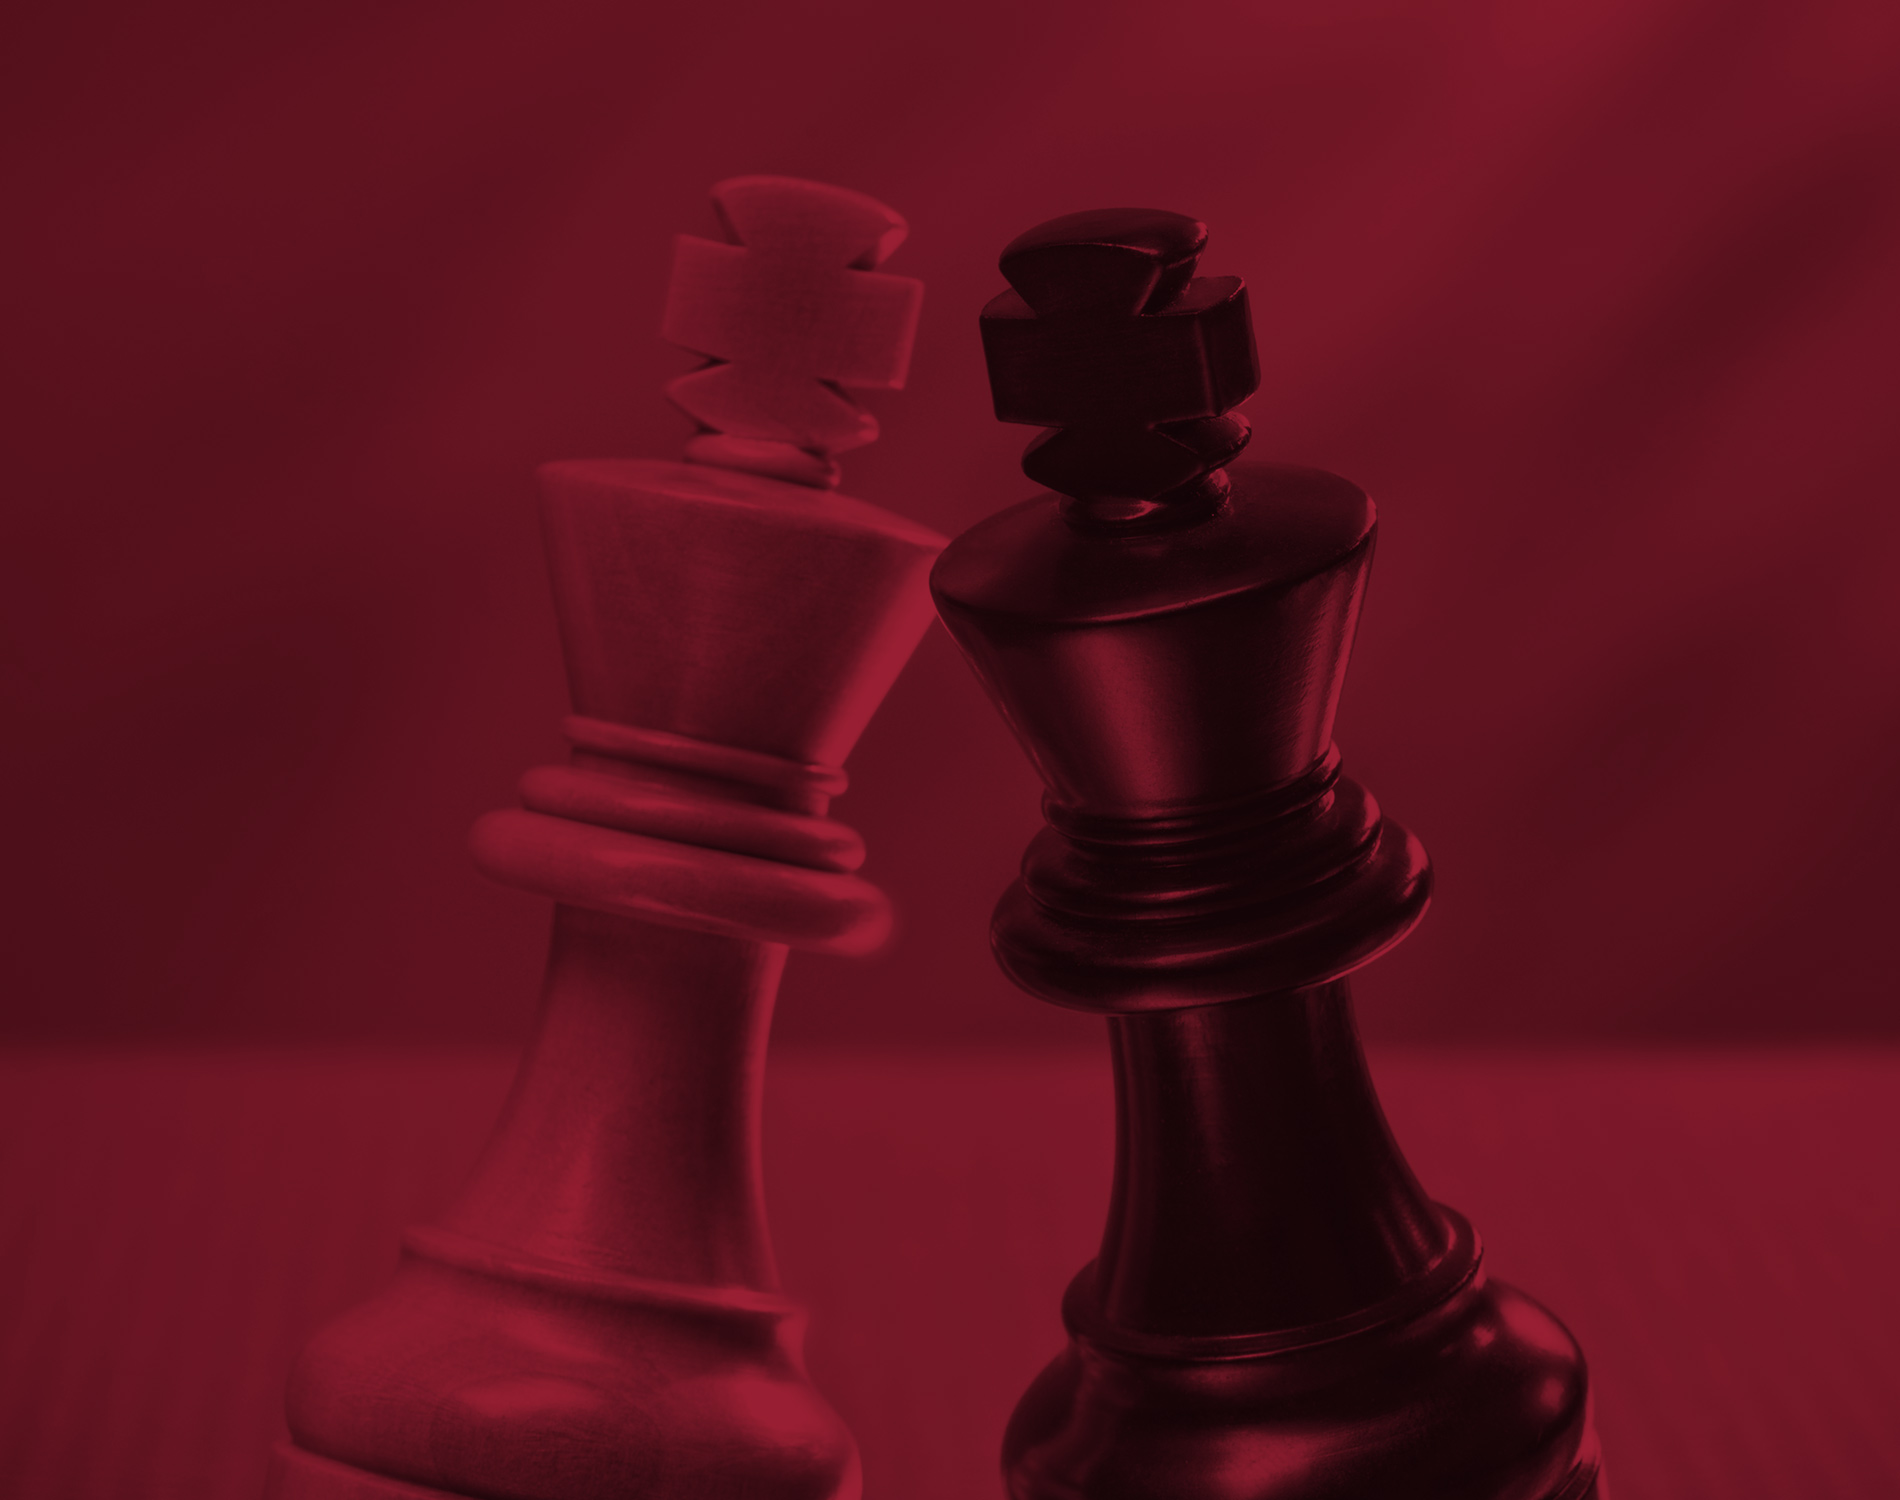 Chess Pieces with a red overlay